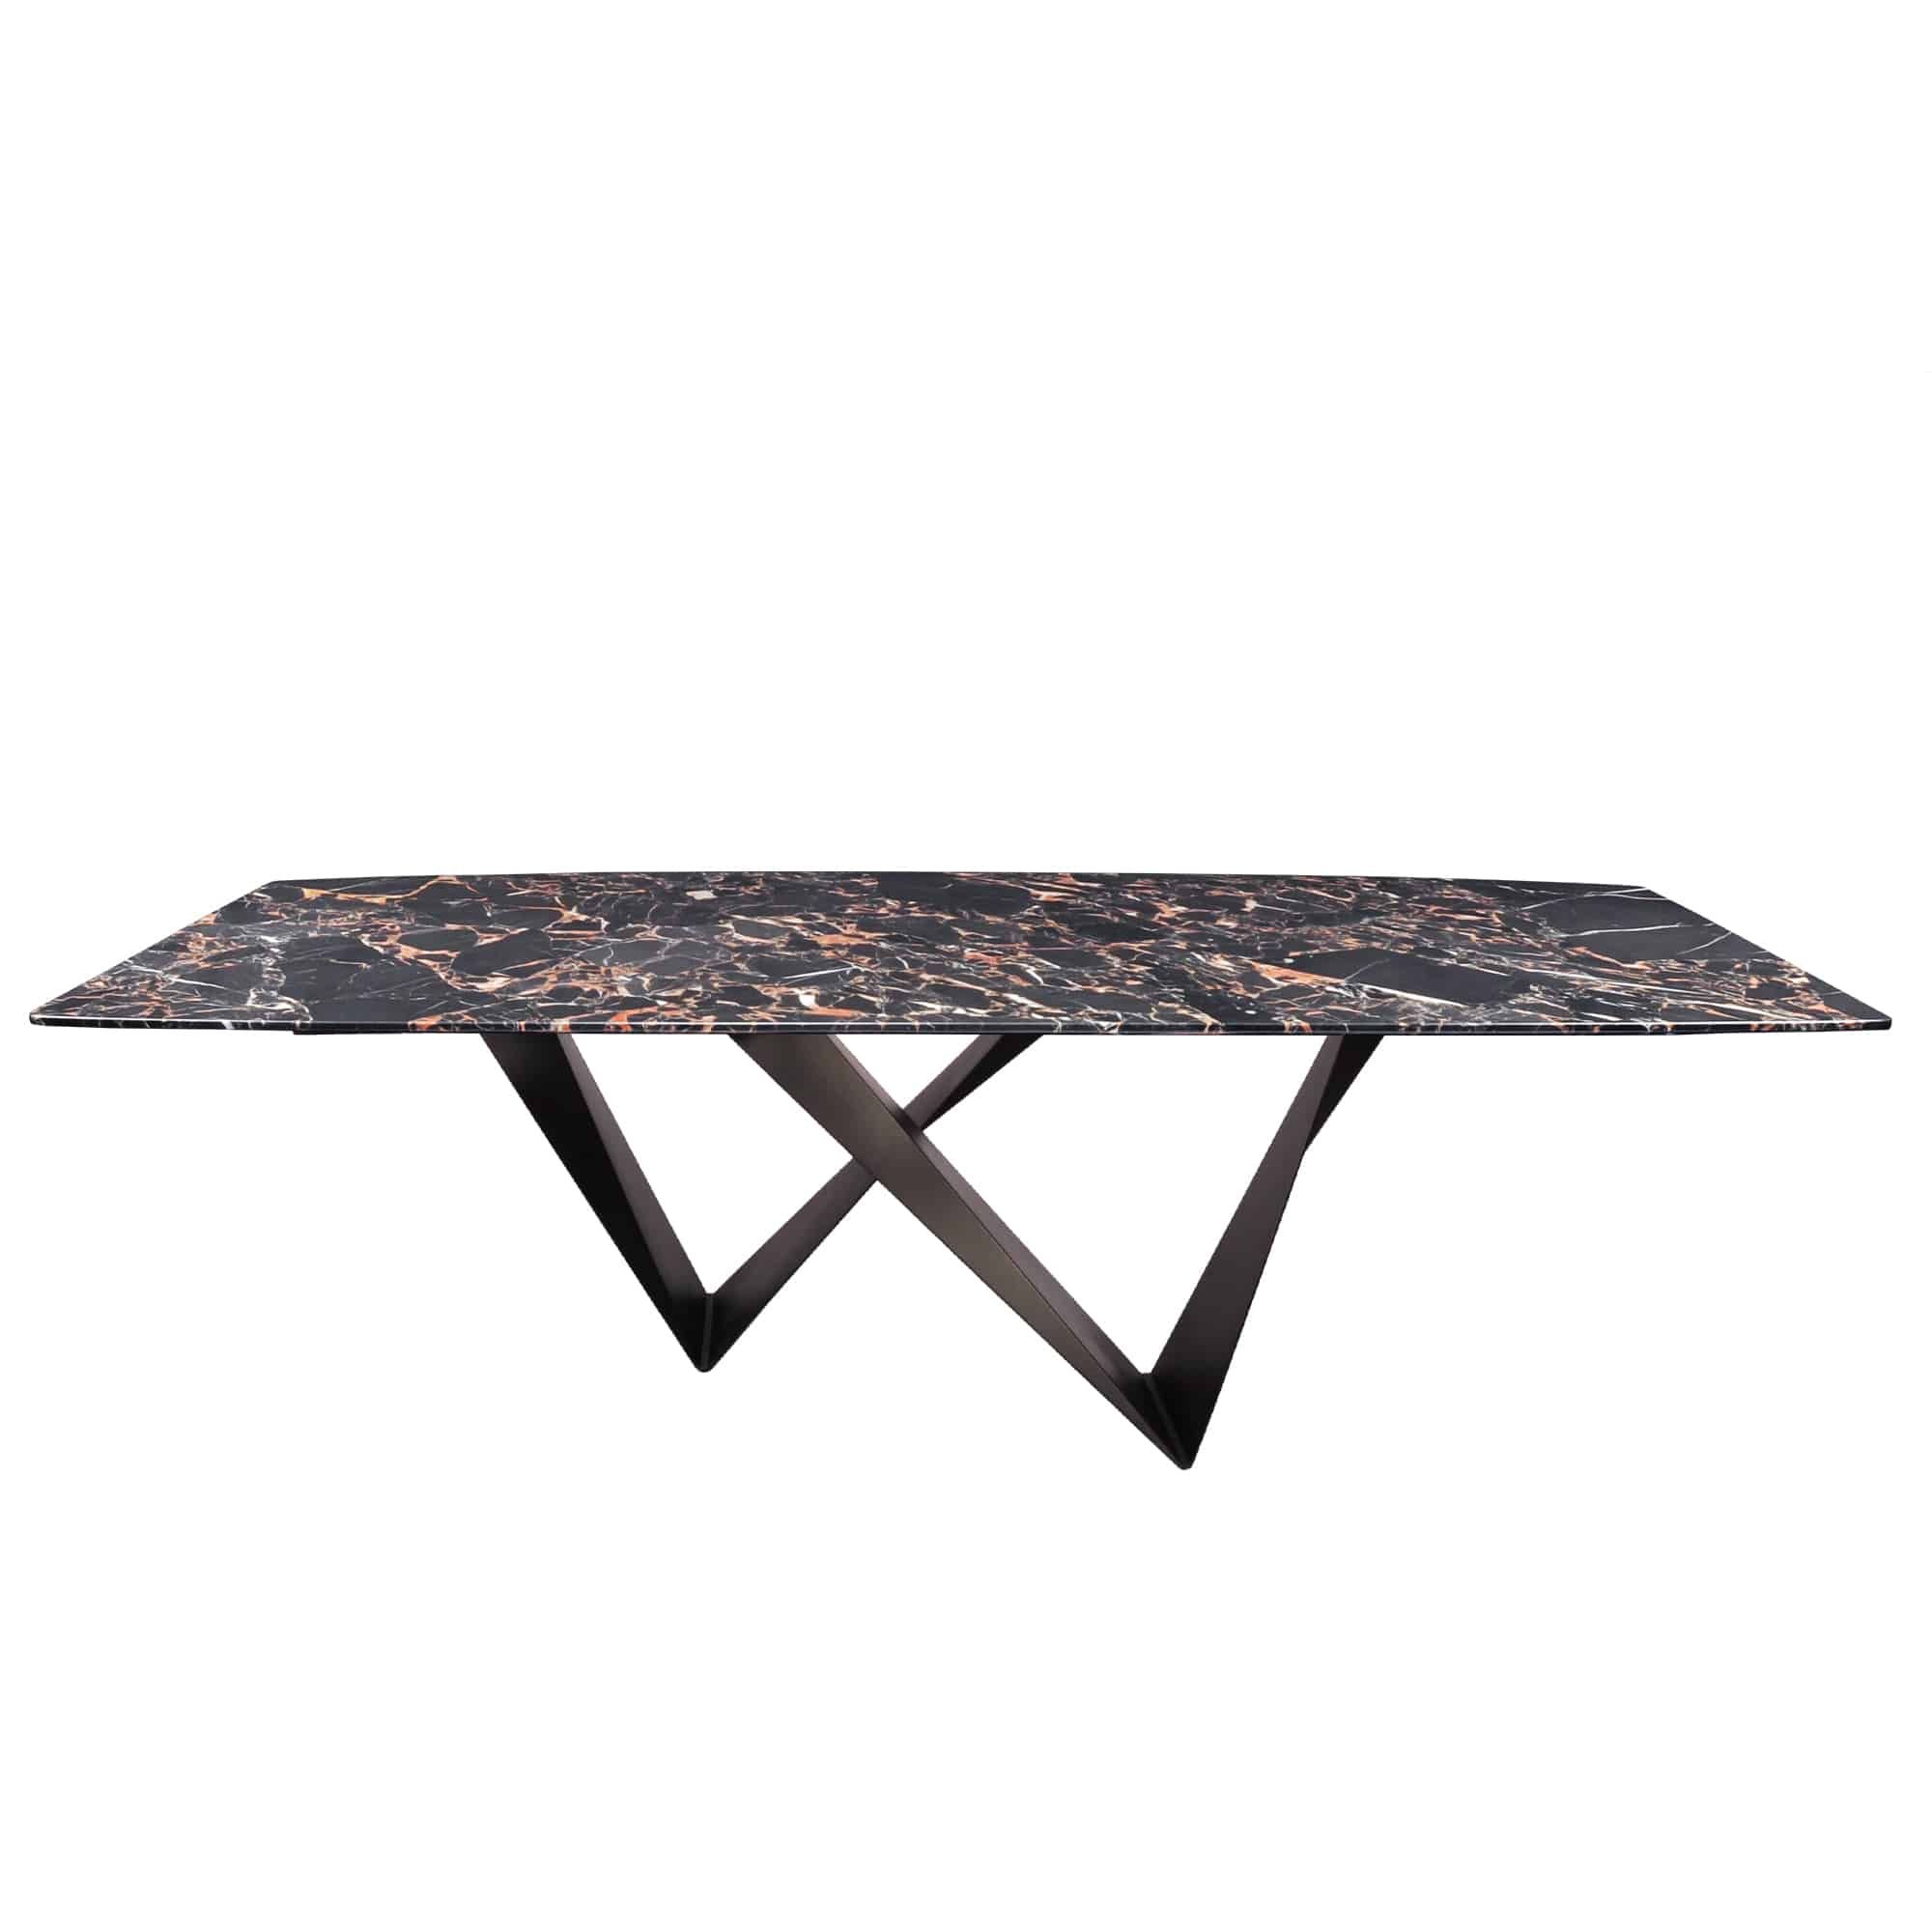 Decasa Rectangular Marble Dining Table Portoro Gold In Square Black And Brushed Gold Console Tables (View 16 of 20)